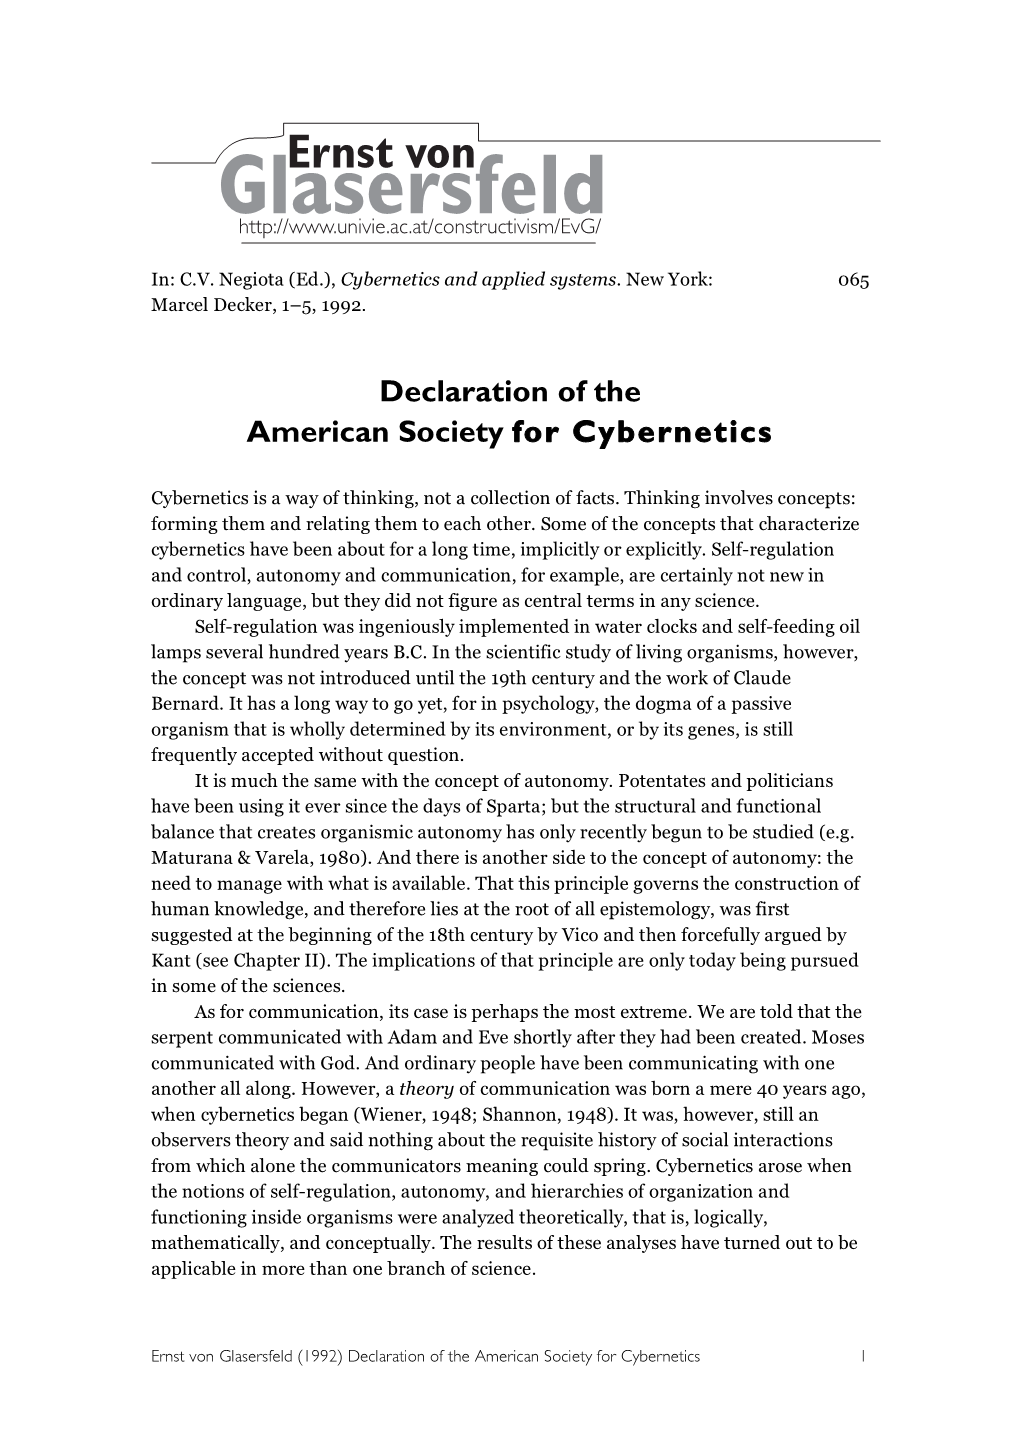 Declaration of the American Society for Cybernetics